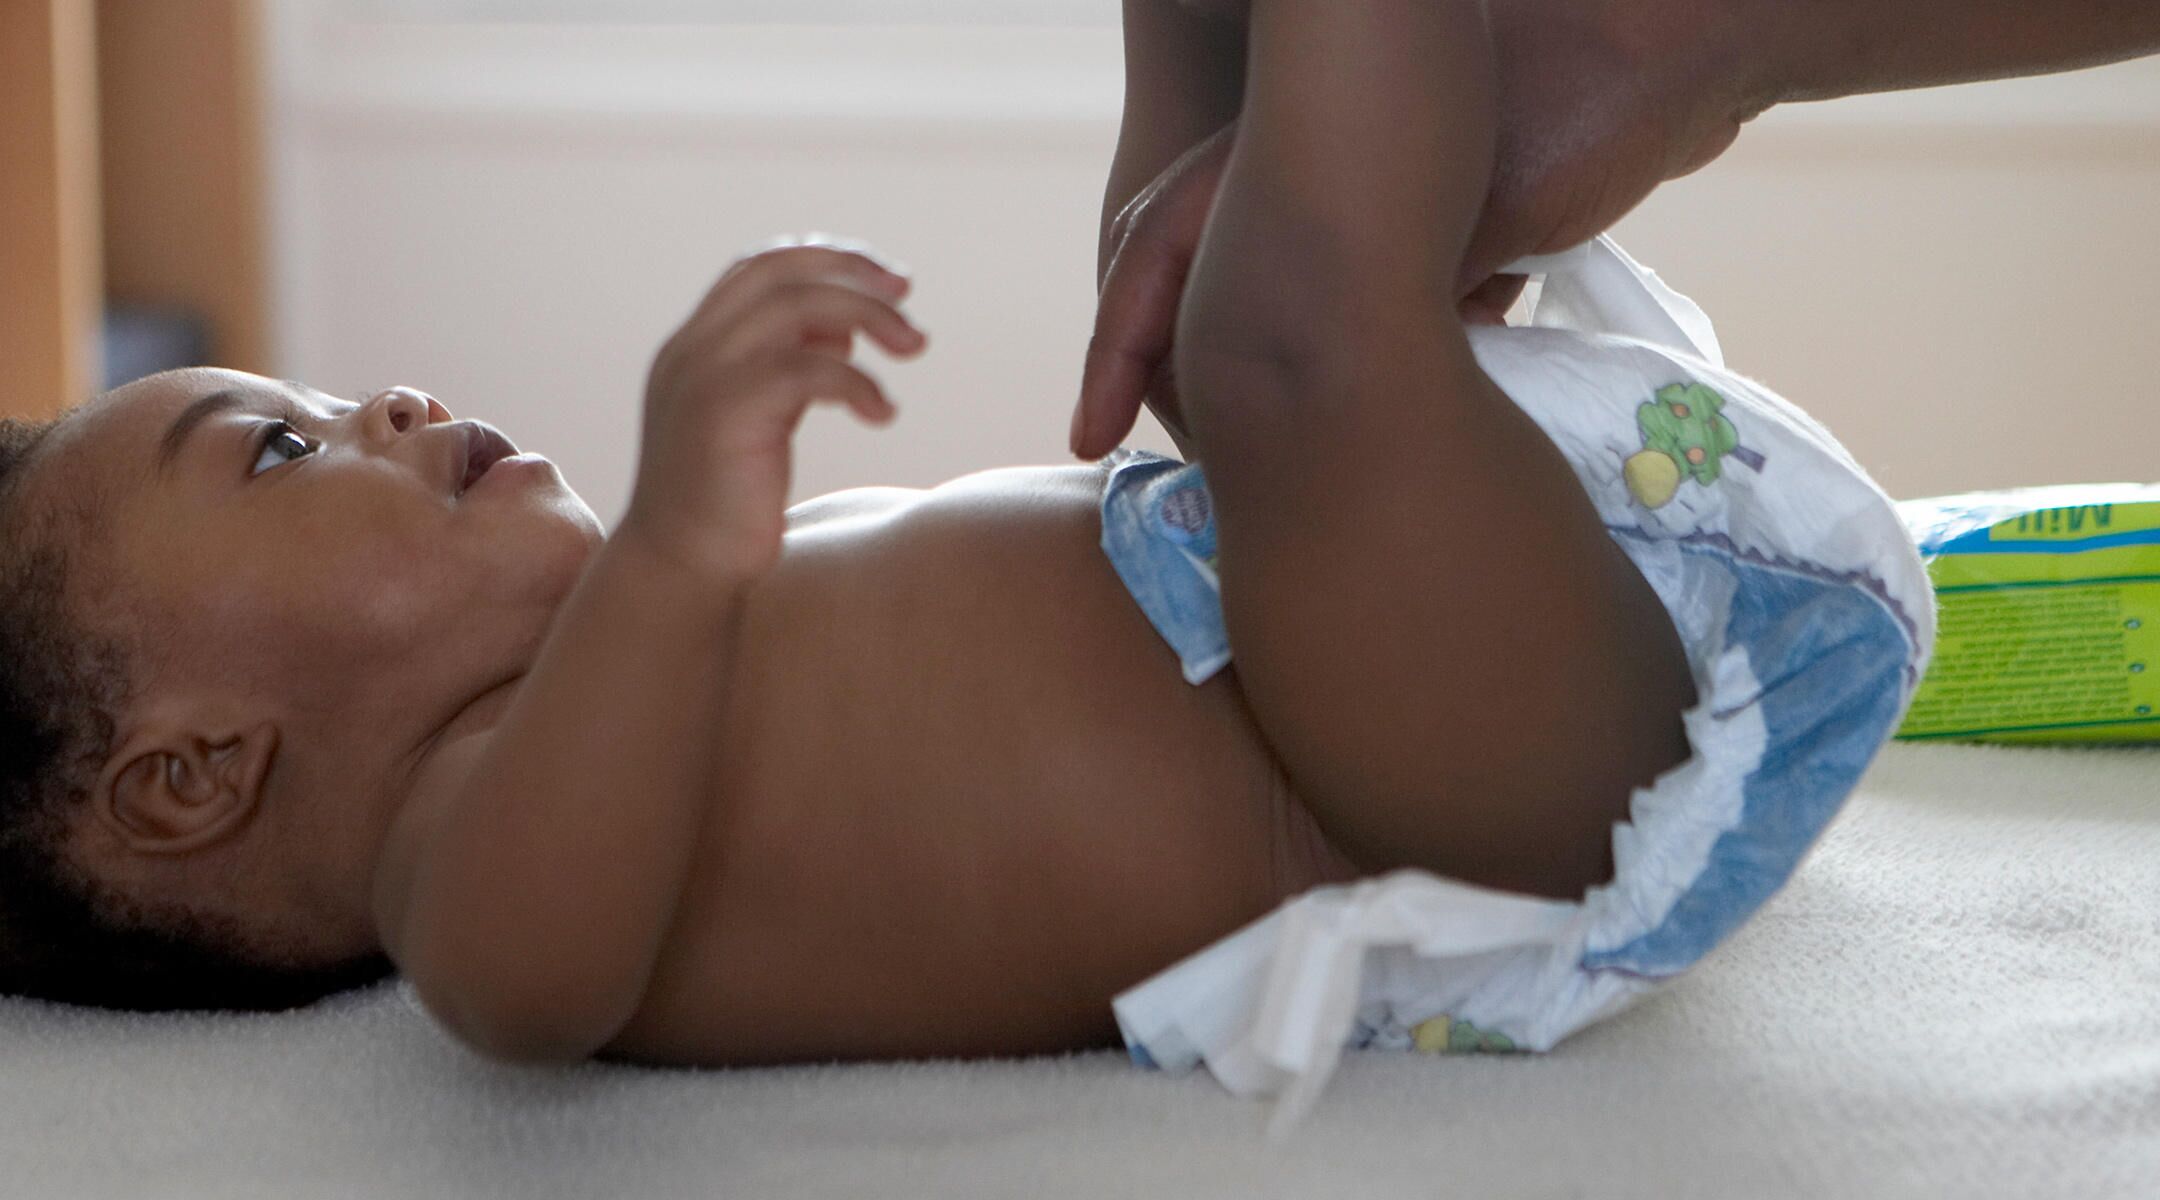 Diaper Blowout: Causes, Cleanup, and Prevention